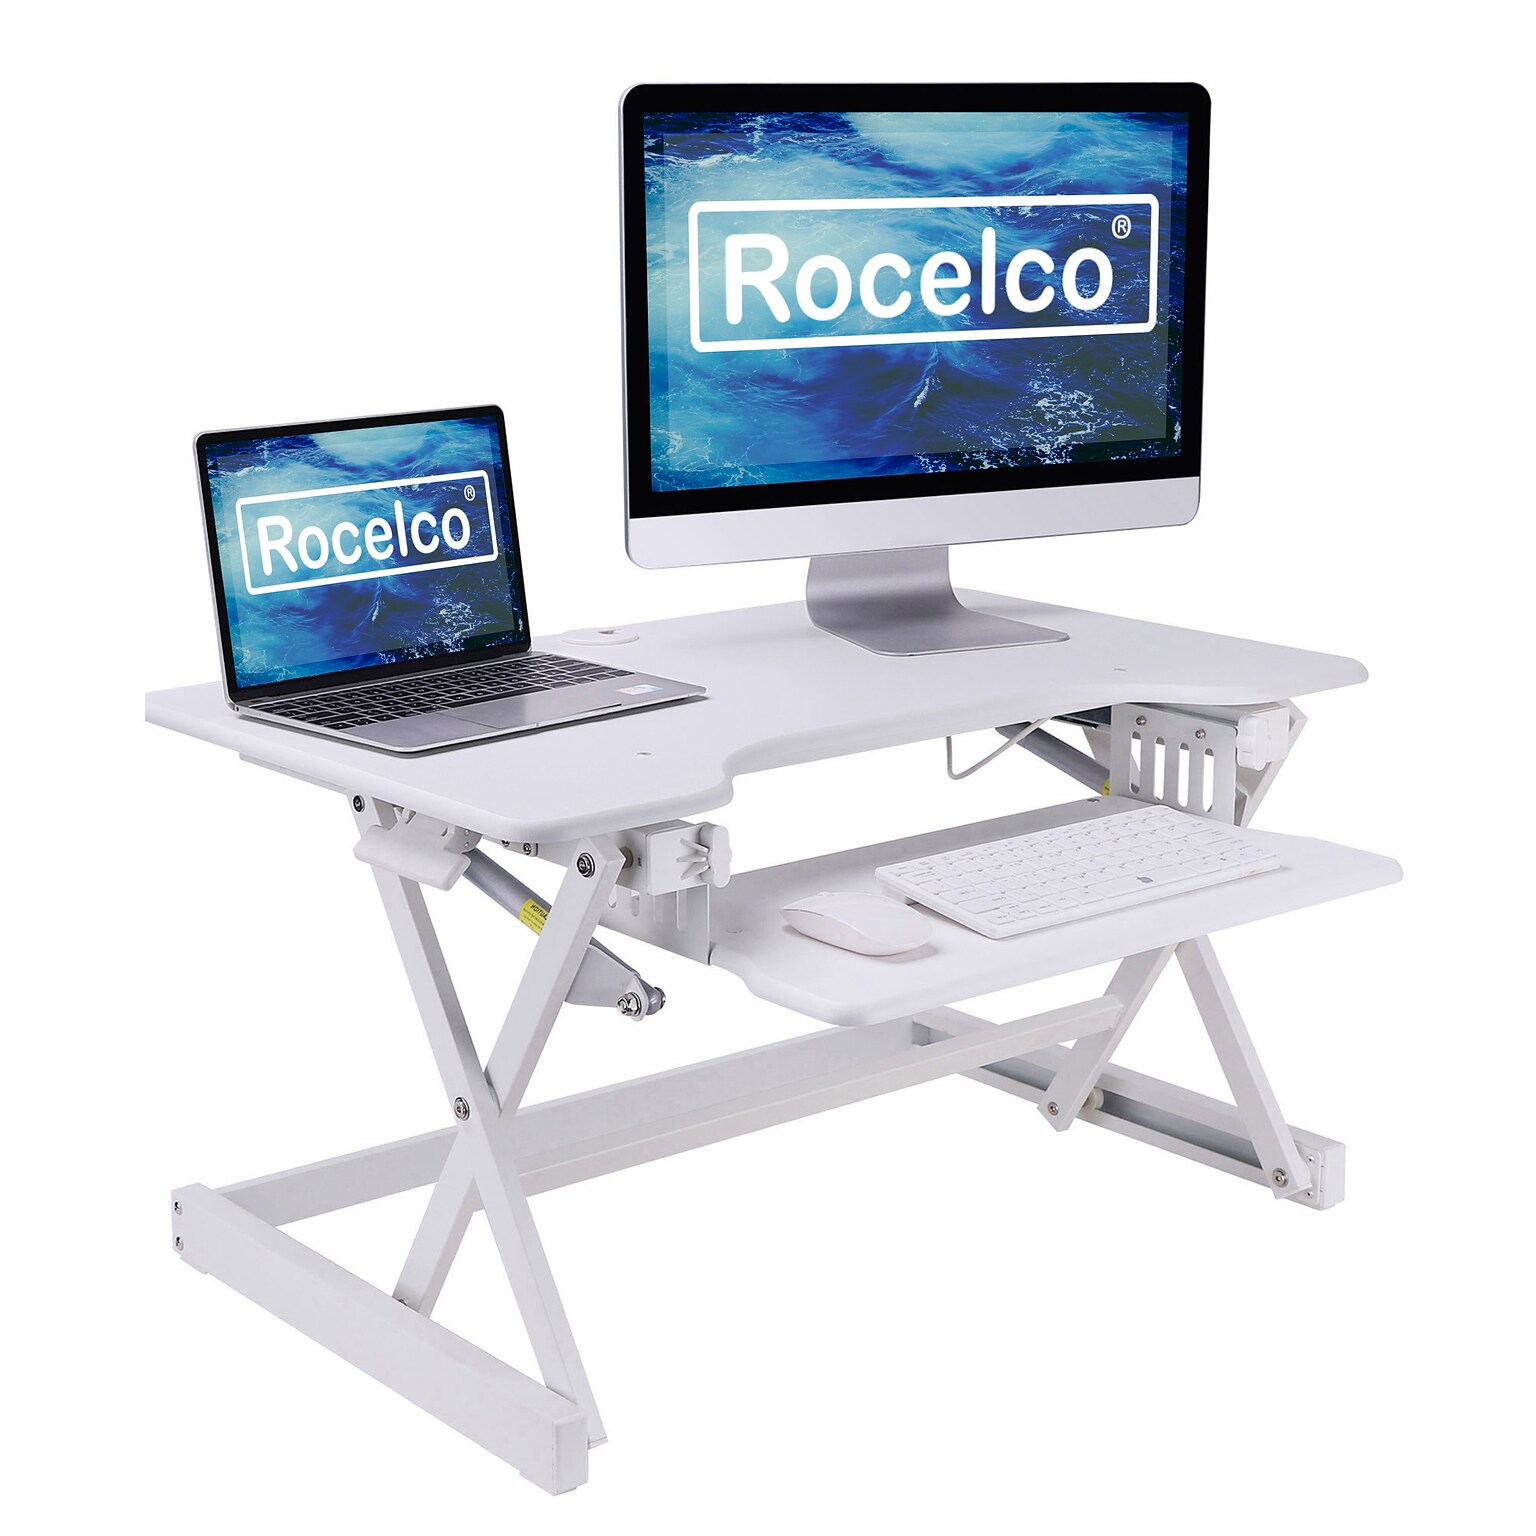 Rocelco 32 Height Adjustable Standing Desk Converter, Tall Sit Stand Up Retractable Keyboard Riser, White (R EADRW)